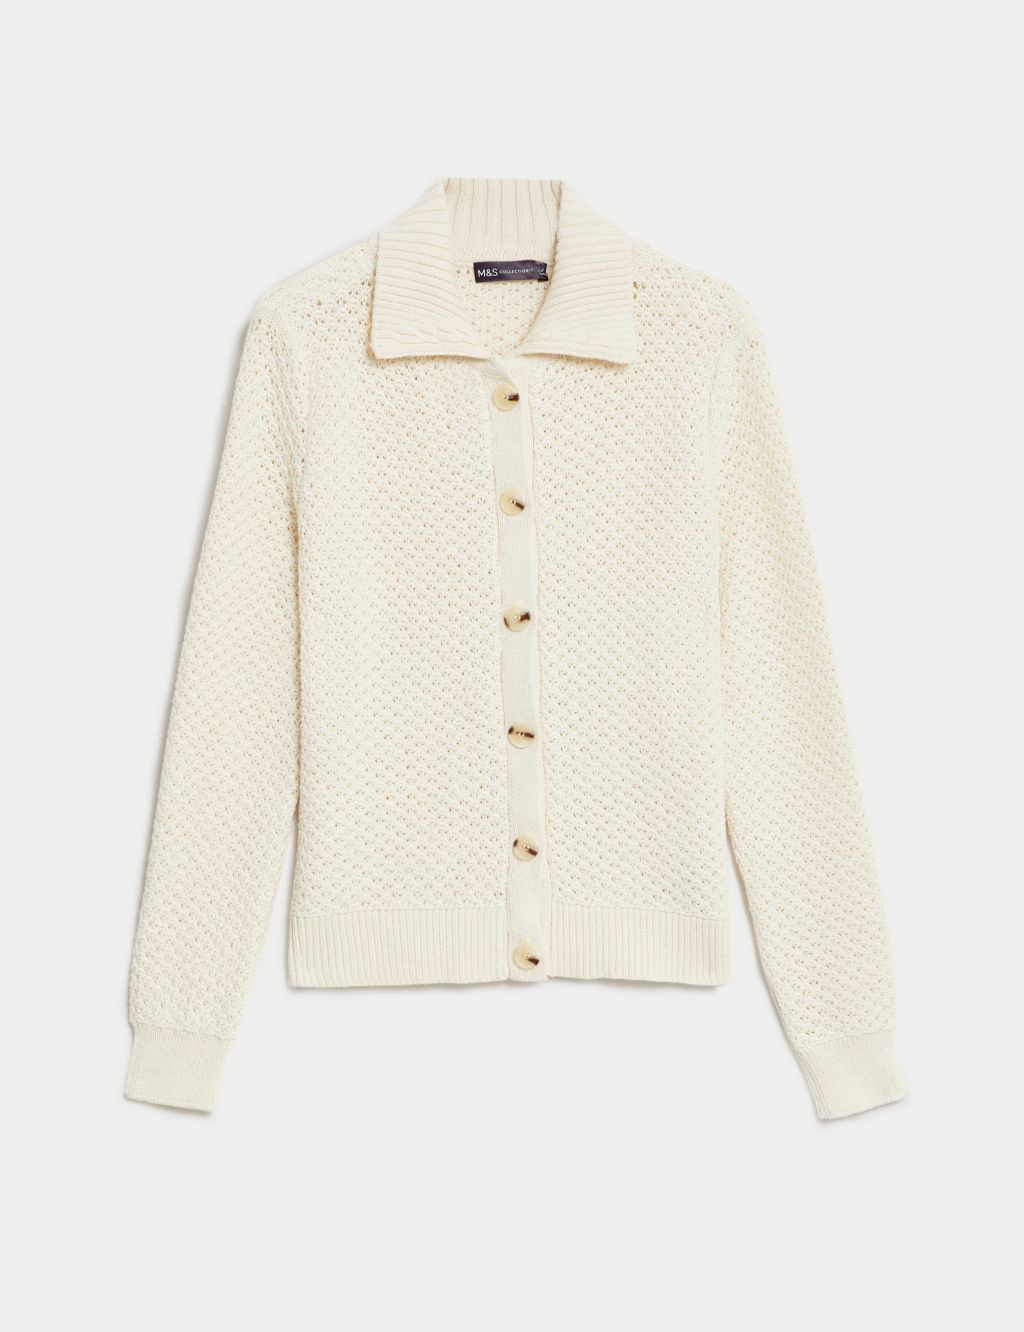 Cotton Rich Textured Collared Cardigan image 2